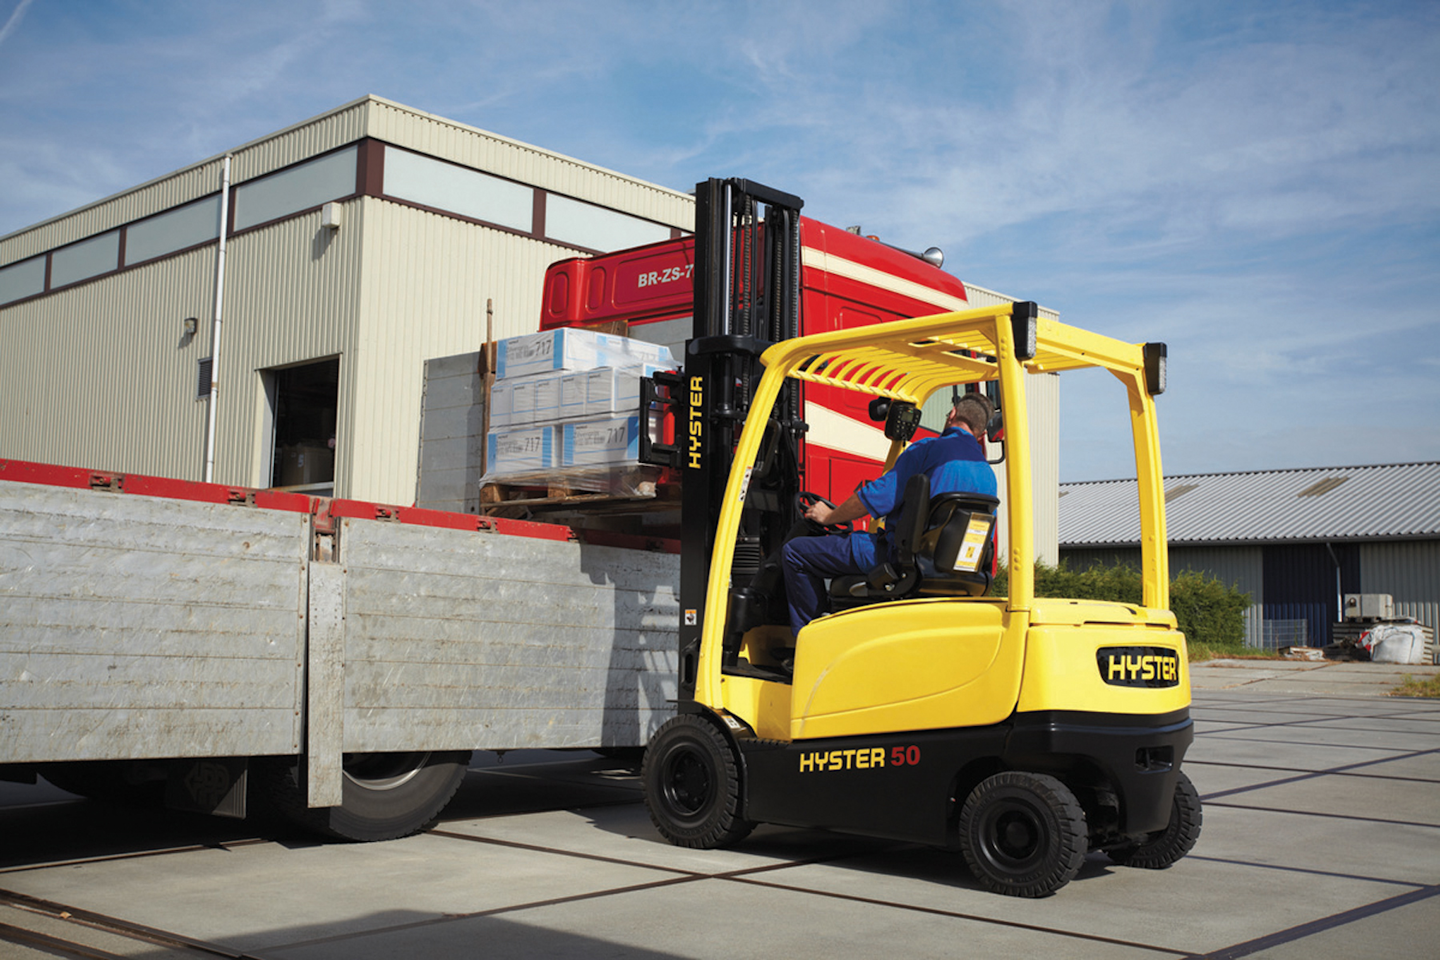 Hyster Named To Sustainability List Rental Equipment Register